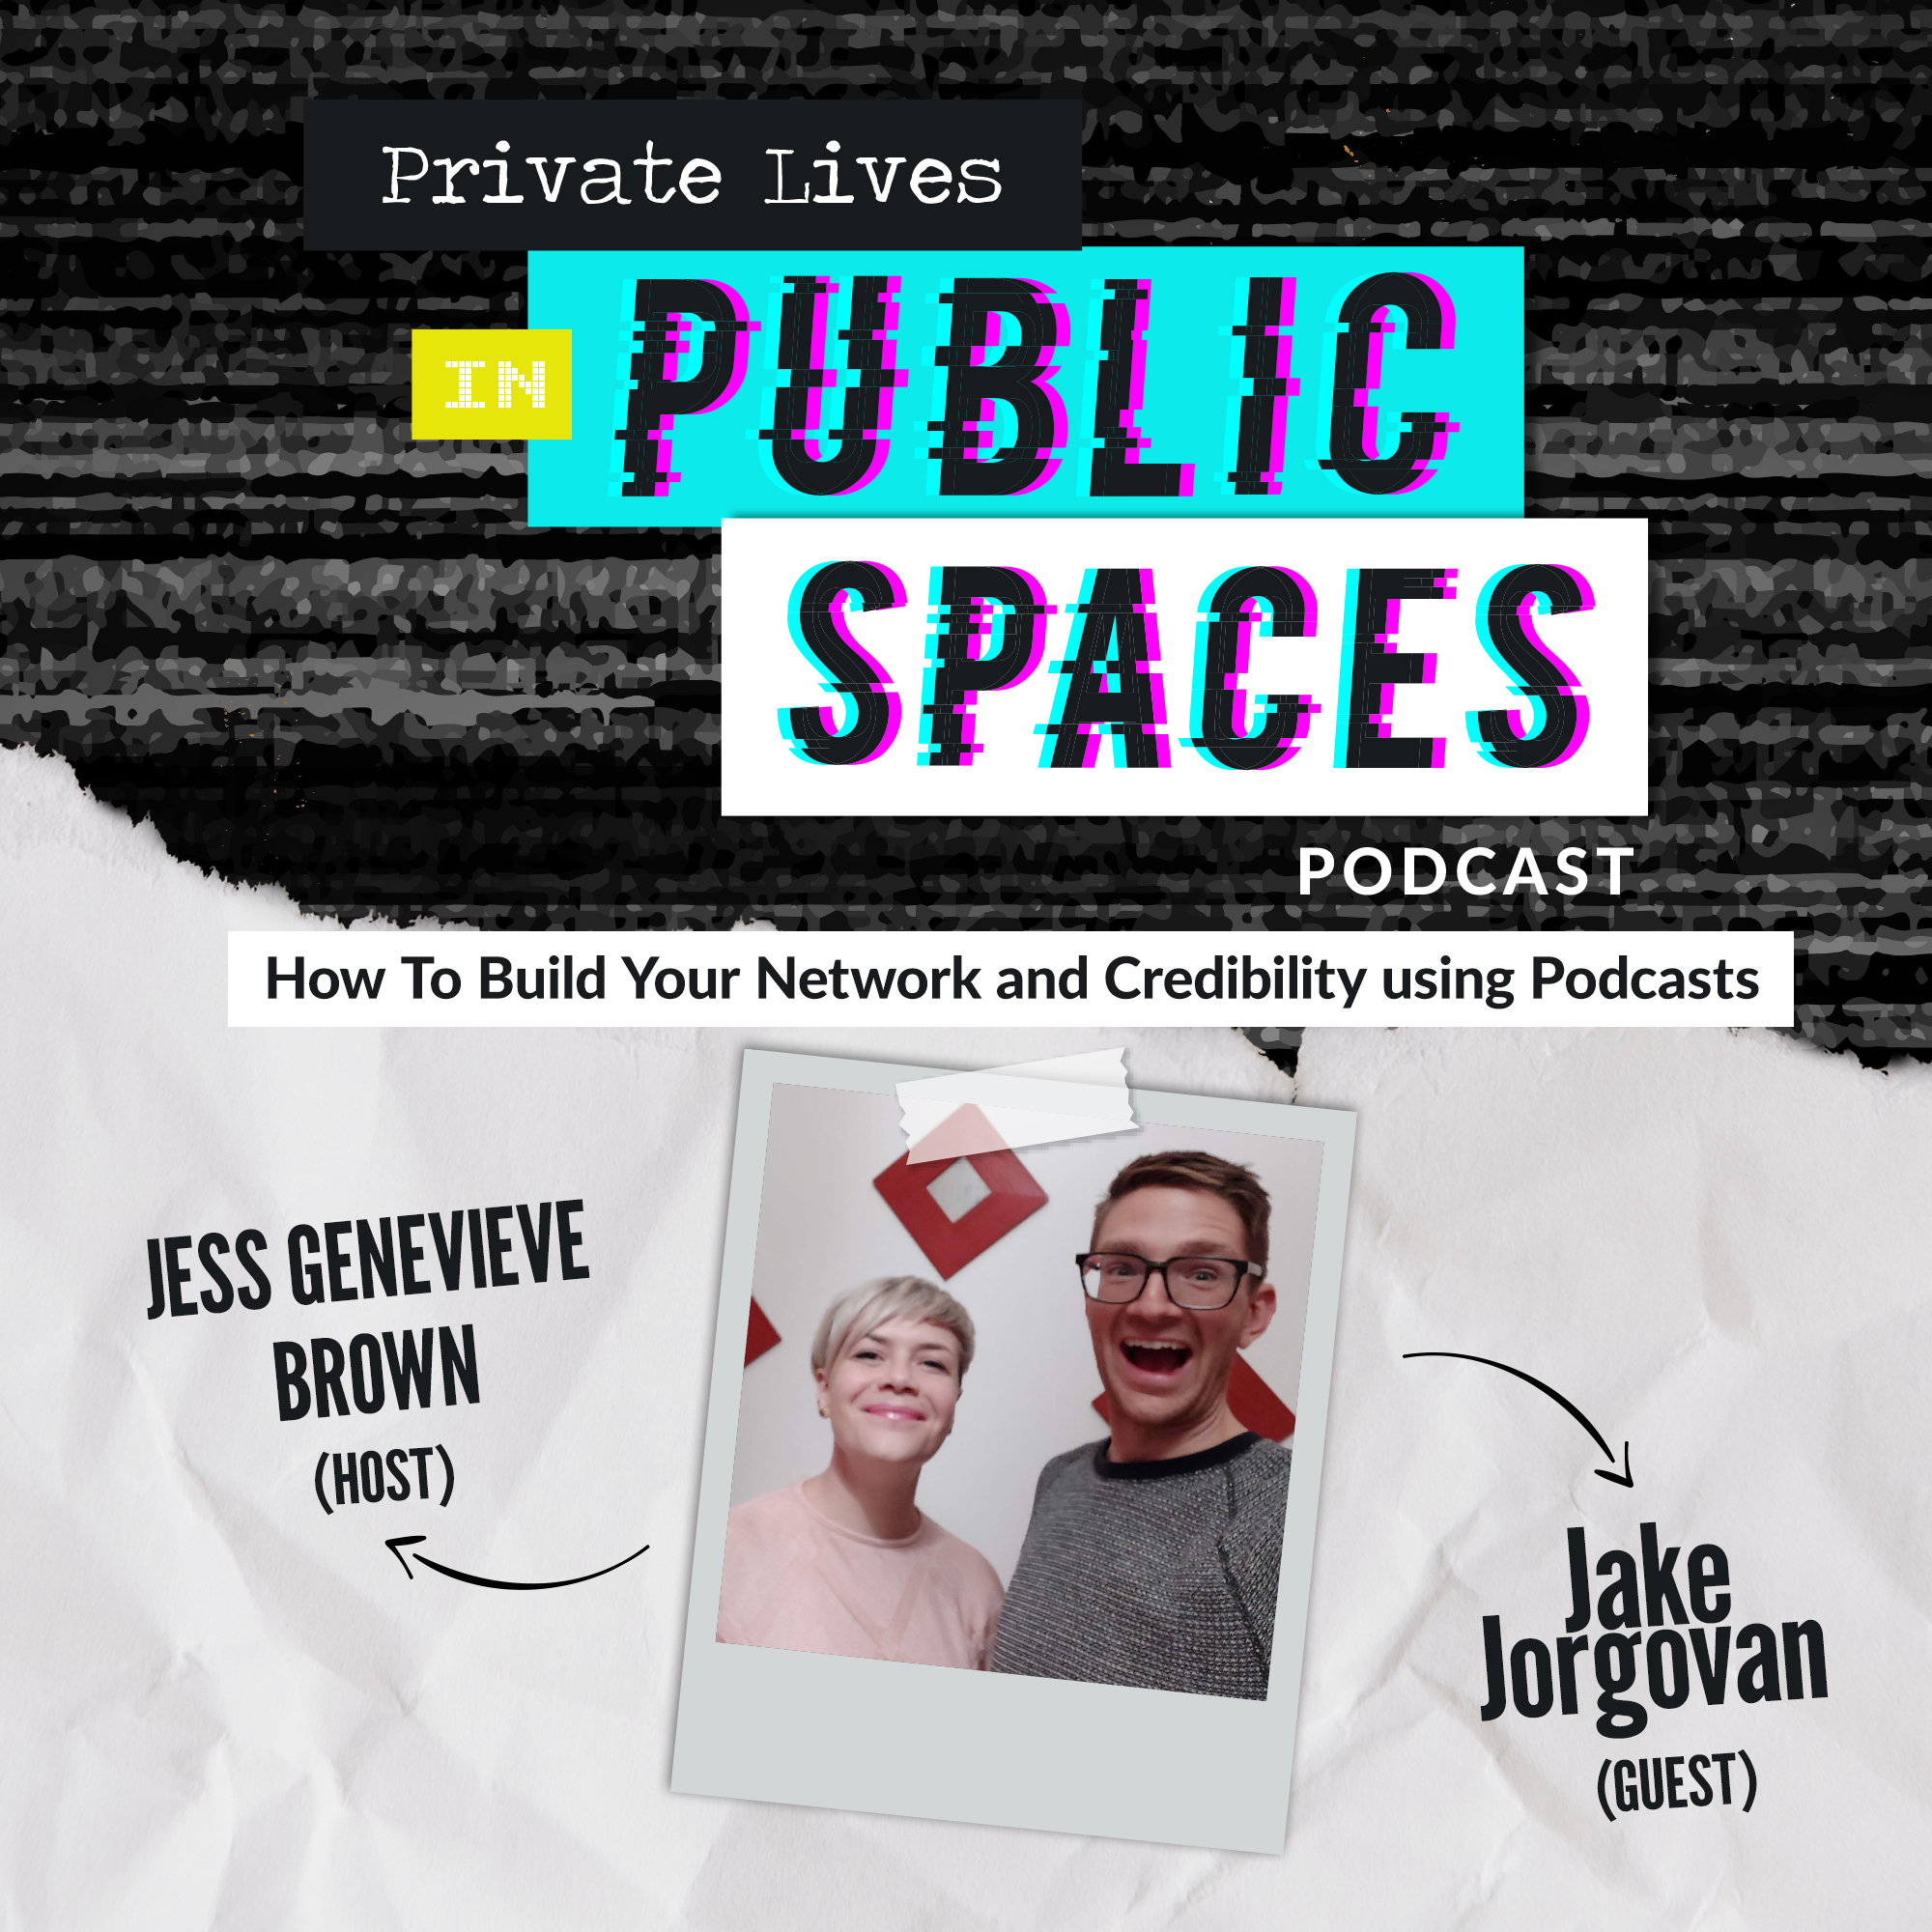 Jake Jorgovan on How to Build Your Network & Credibility using Podcasts